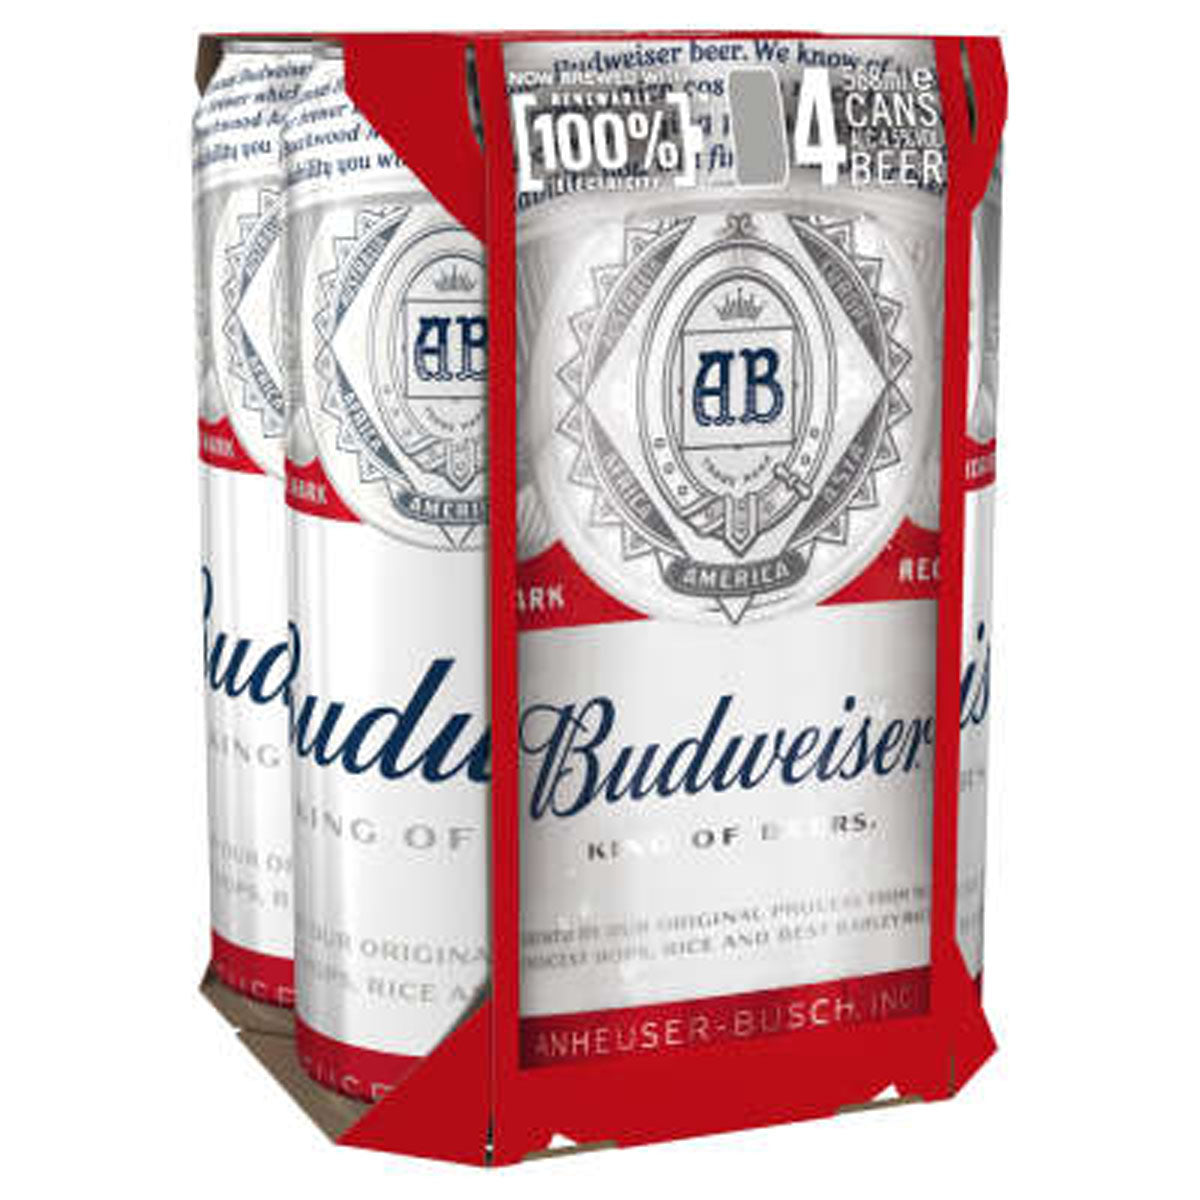 Budweiser - Can Beer (4.5% ABV) - 4x568ml in a box on a white background.